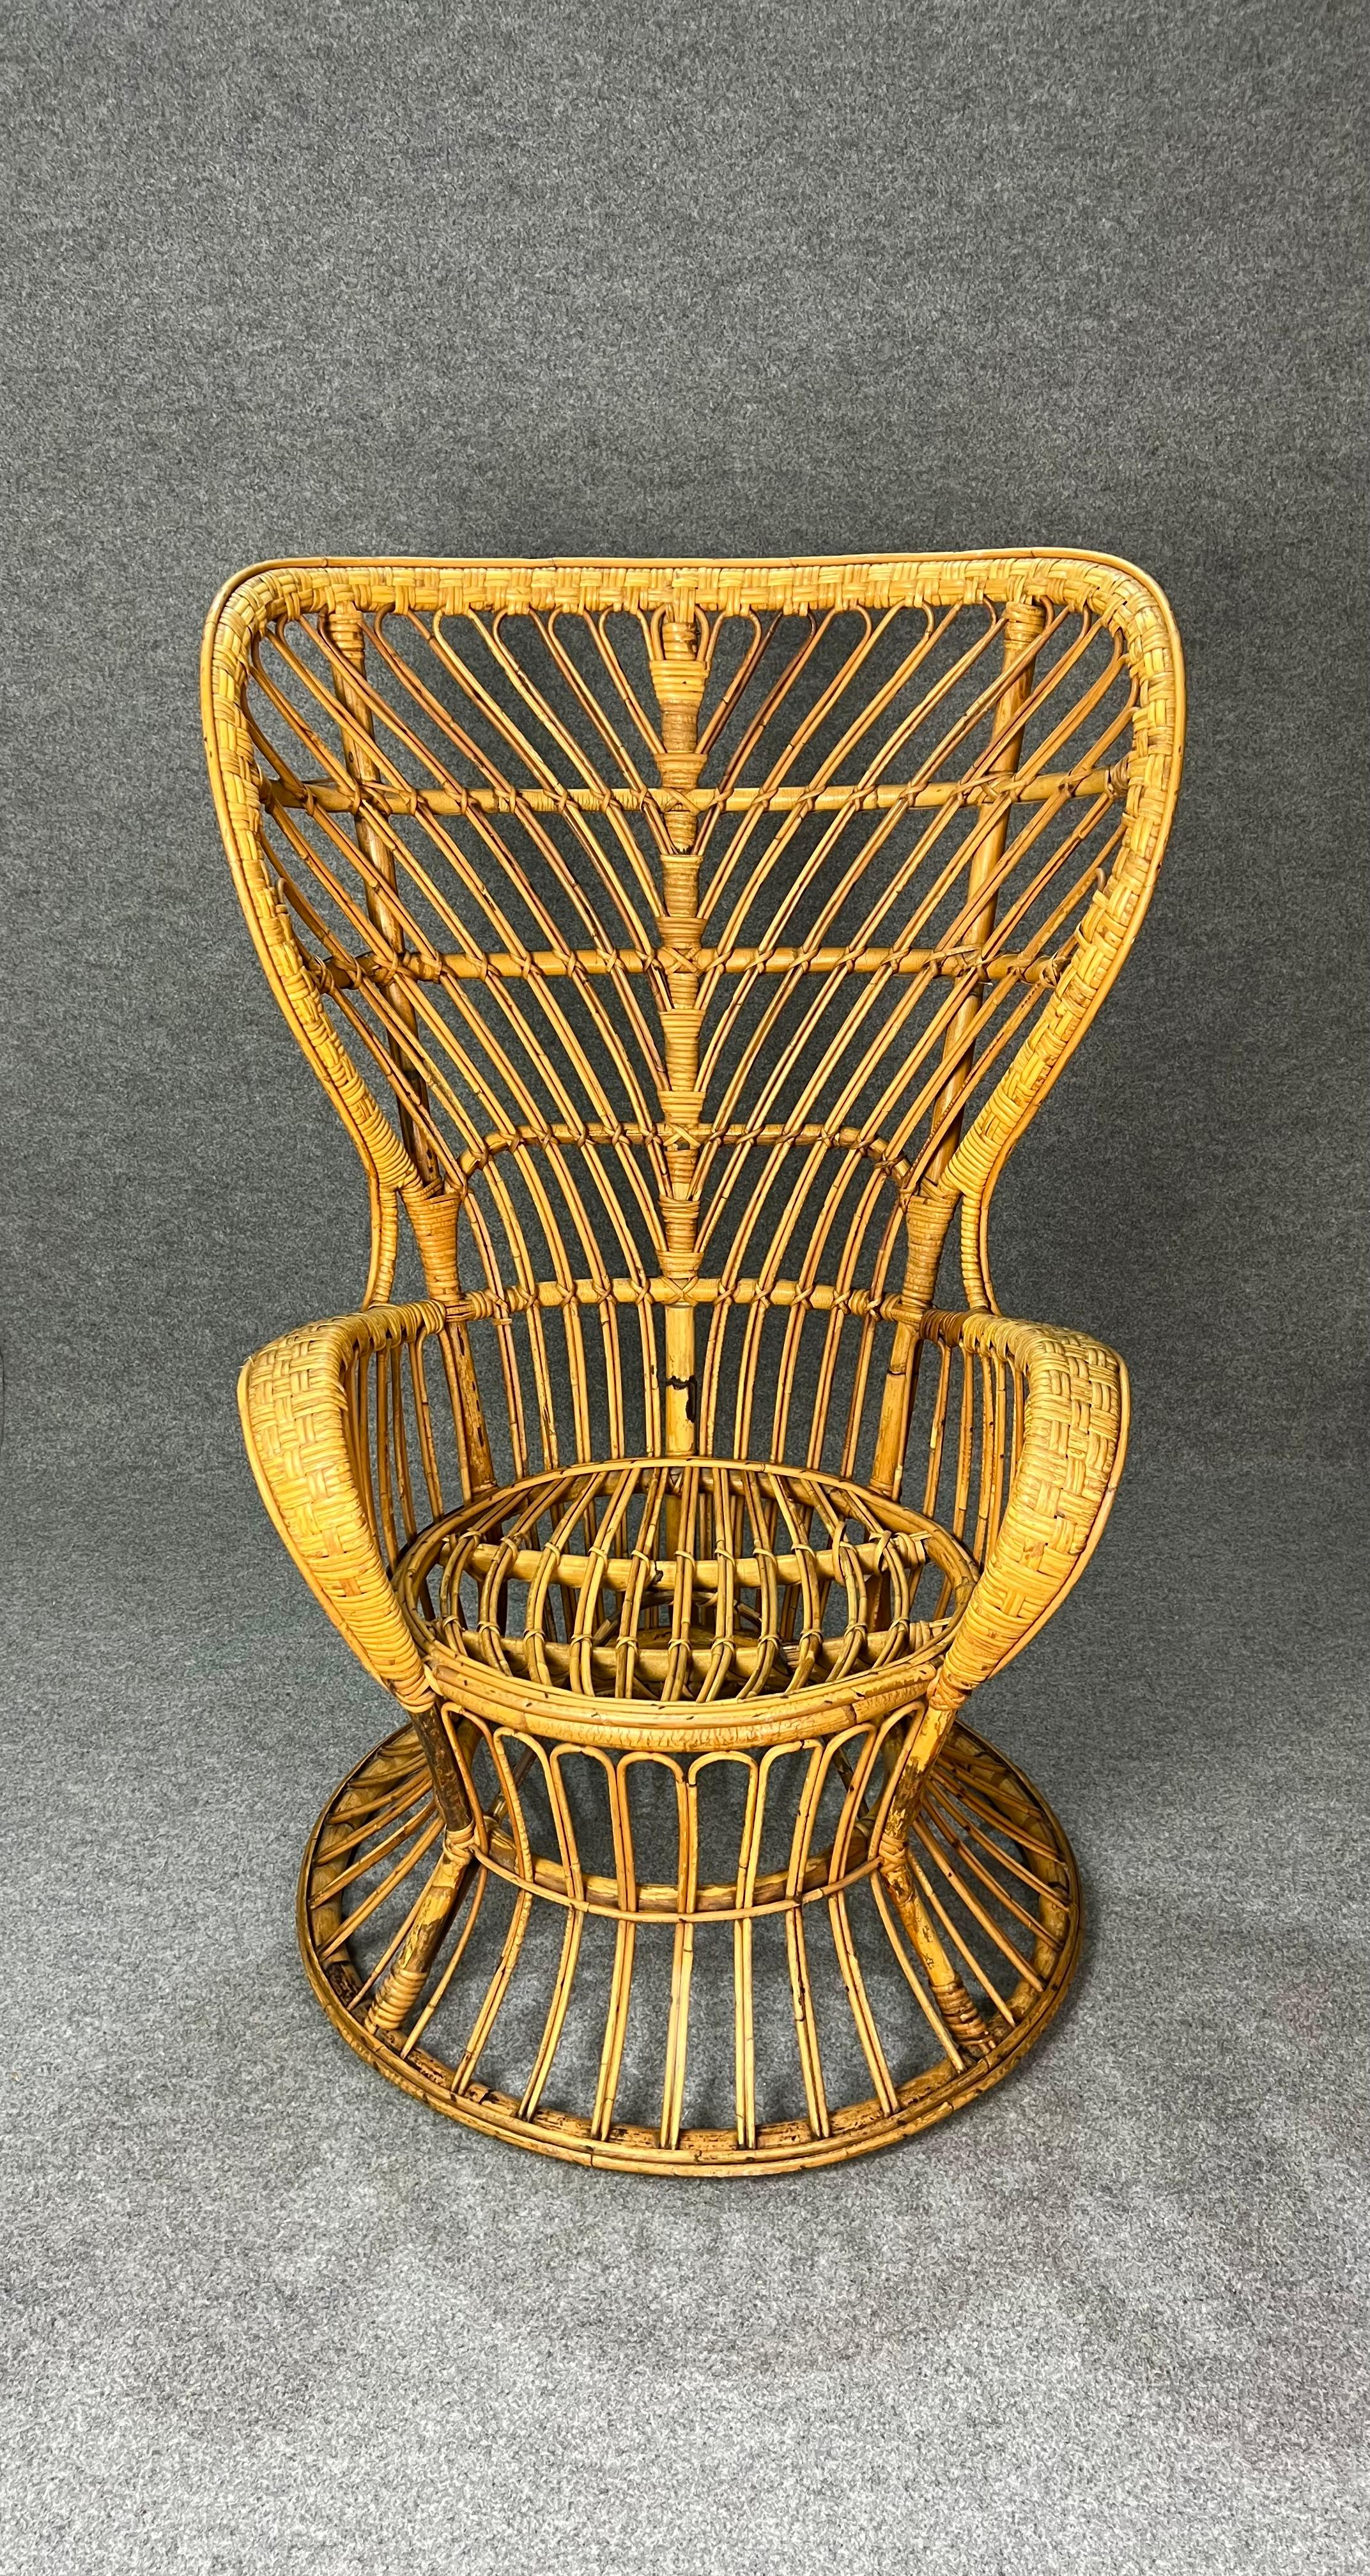 Armchair designed by the well-known Italian designers Lio Carminati and Gio Ponti and produced in the 1950s by Vittorio Bonacina.
The high-backed armchair with curvilinear shapes was made of bamboo and rattan/wicker. Designed specifically for the